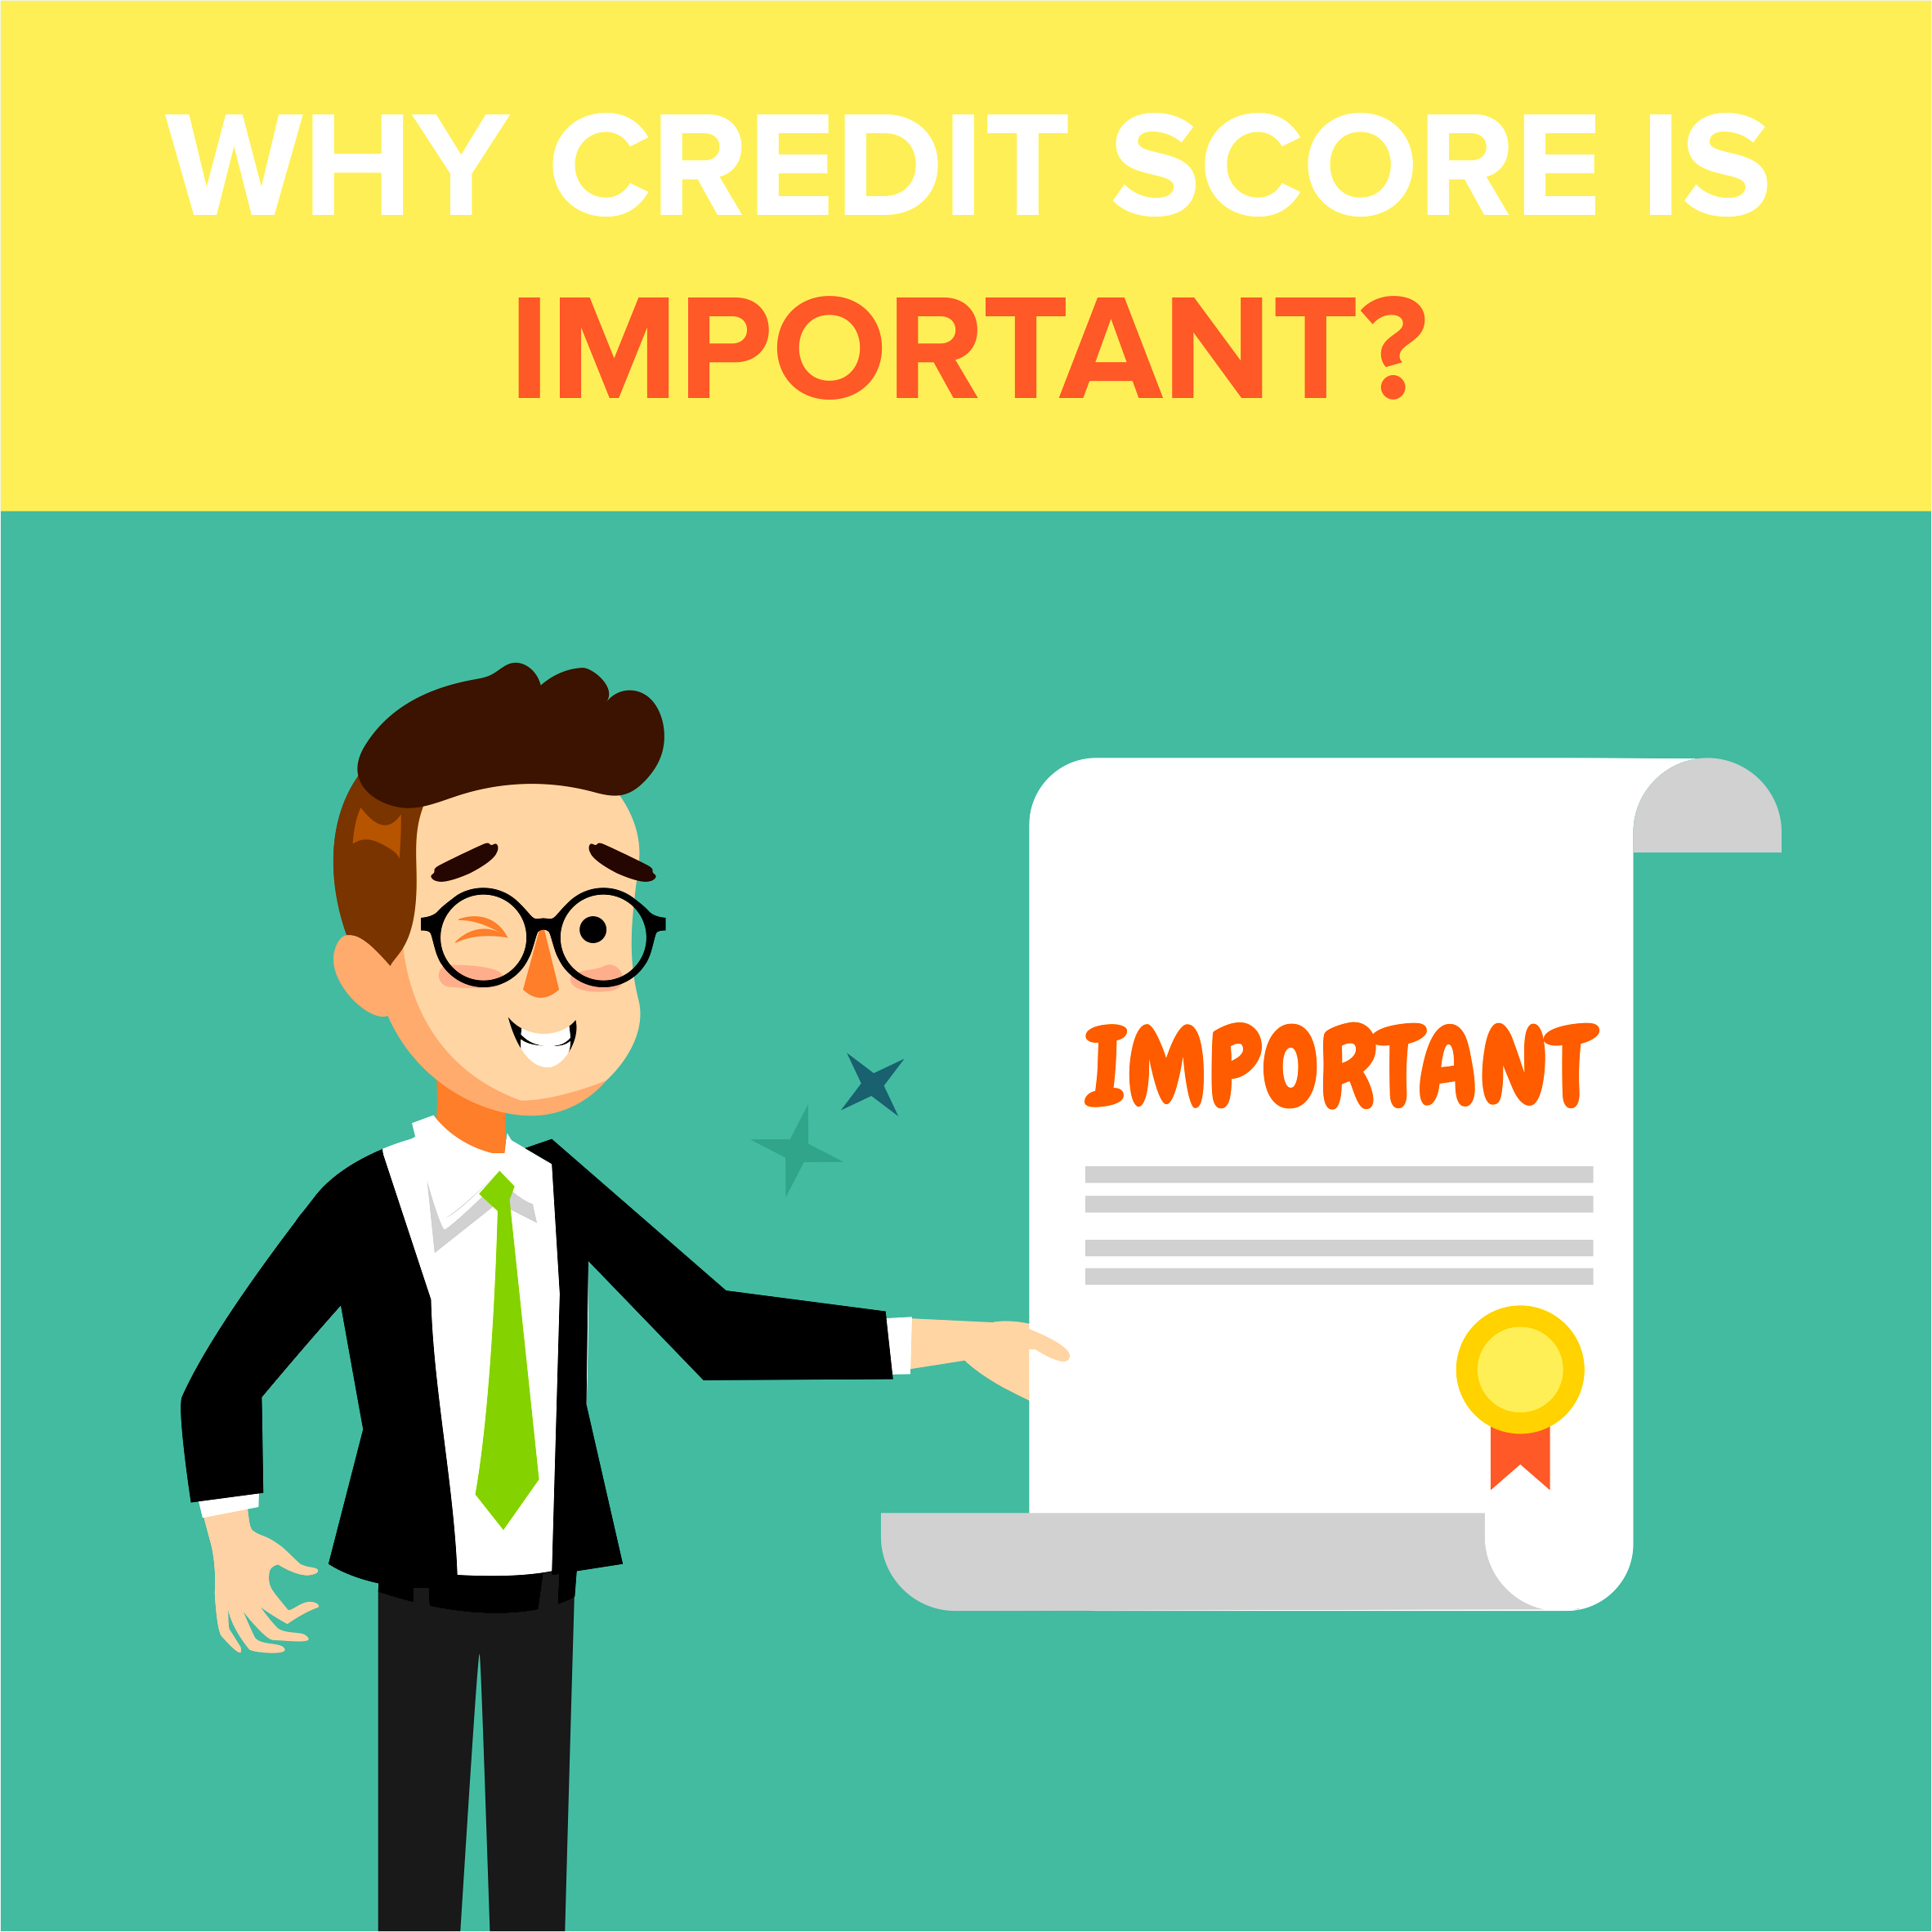 Why Credit Score is Important?